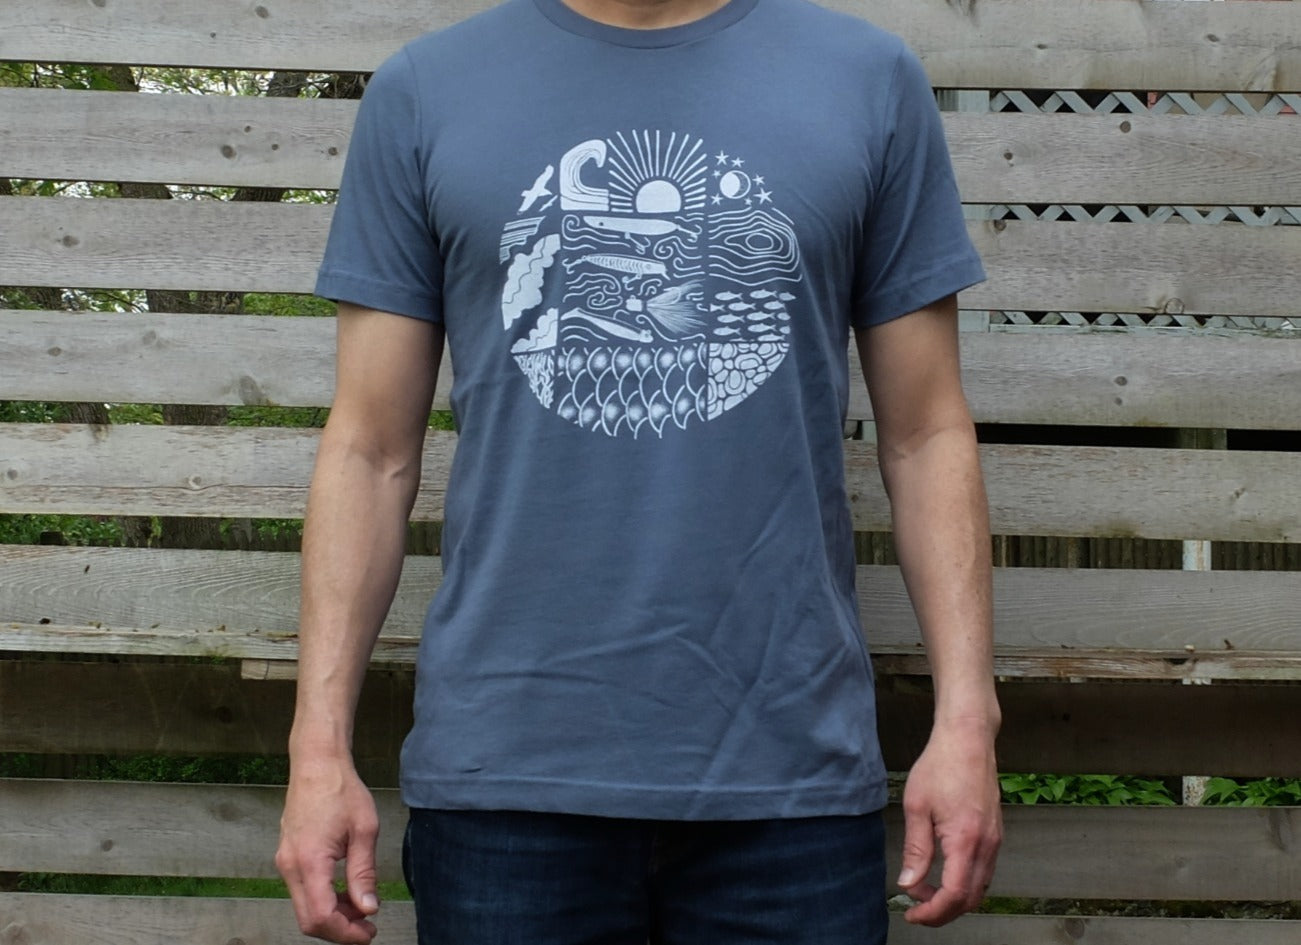 man wearing slate blue cotton t-shirt with white circular design showing multiple boating and fishing sights